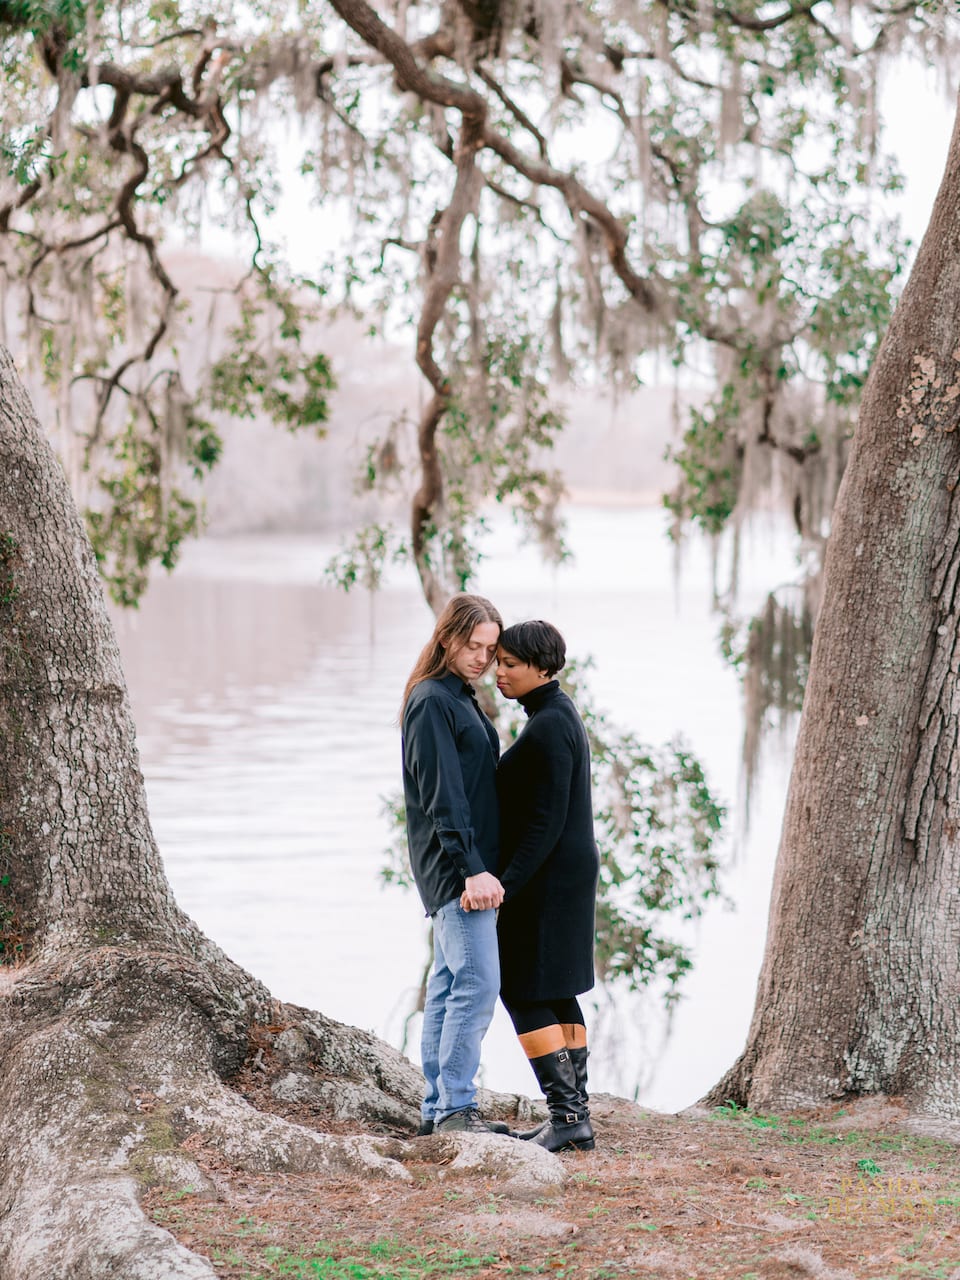 Murrells Inlet Engagement Session by Pasha Belman is Myrtle Beach Photographers